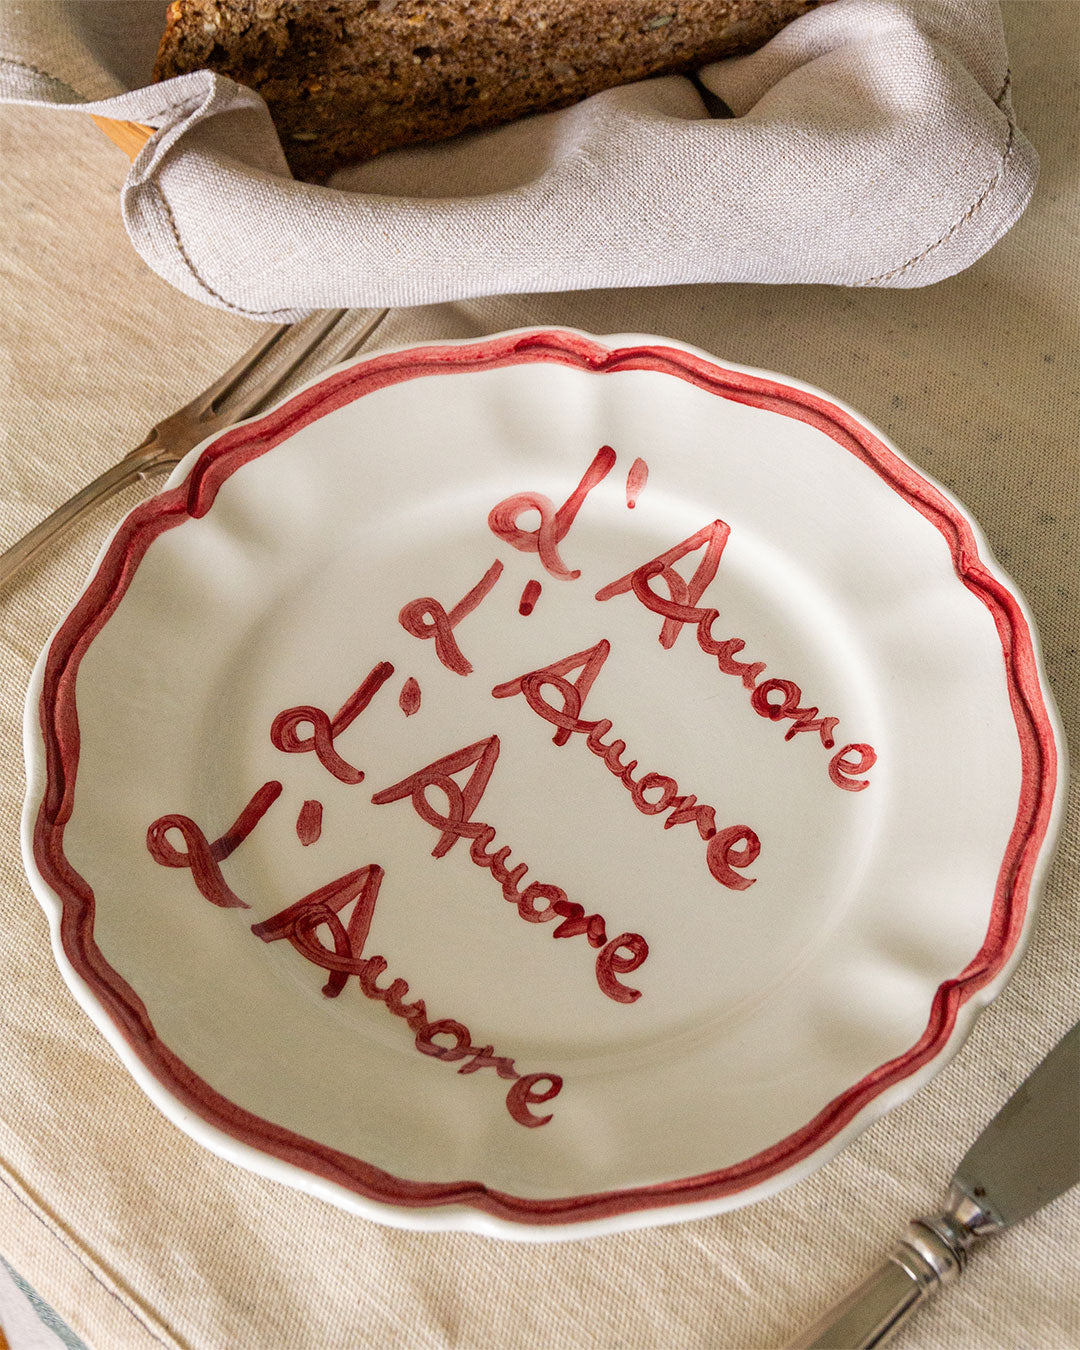 L'amore plate